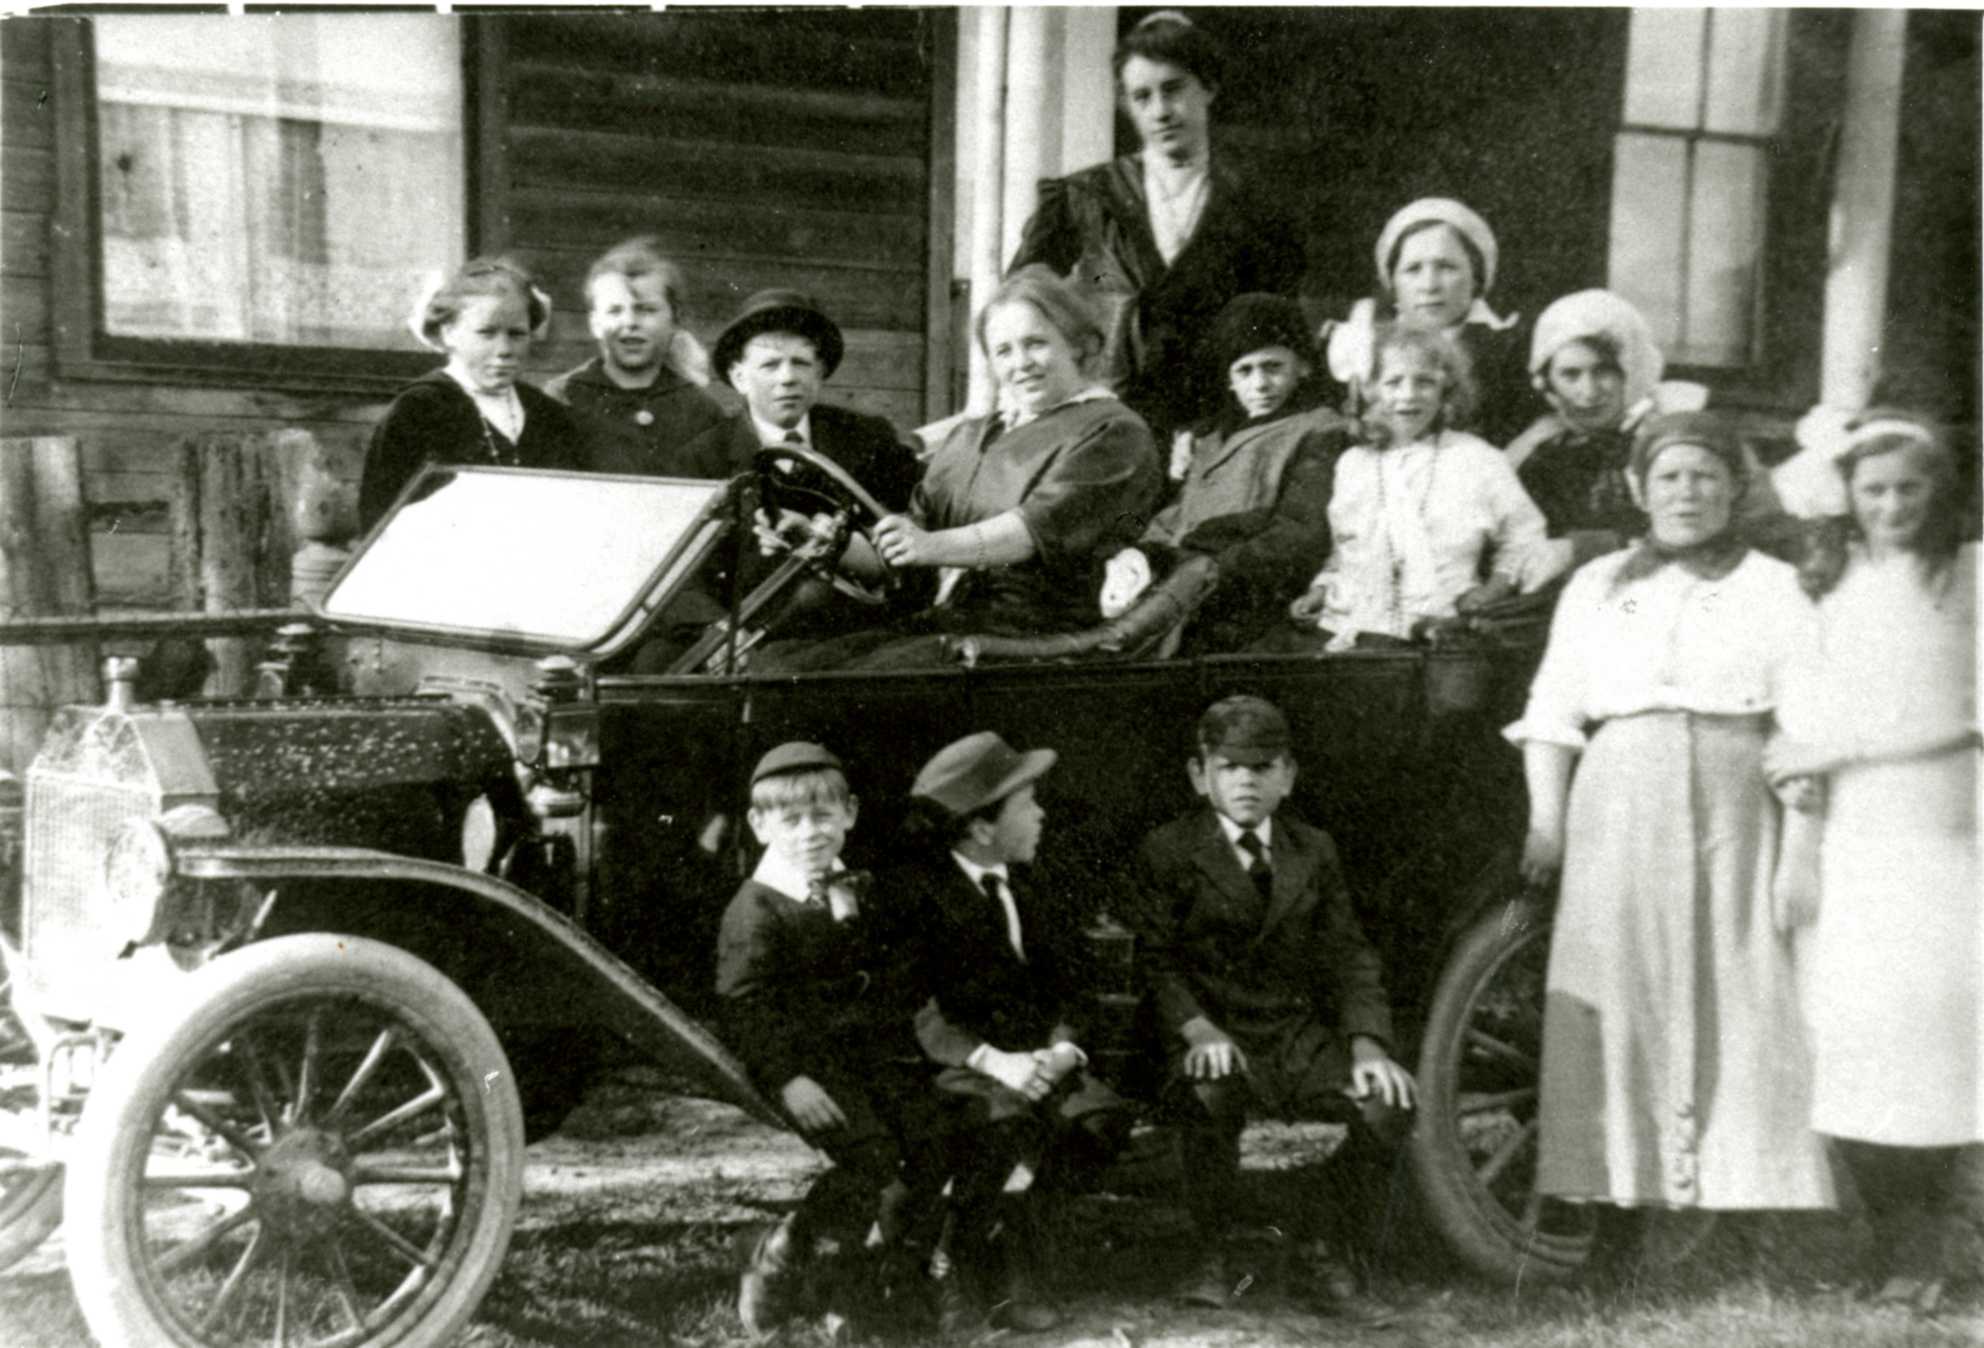 Old car with people gathered around